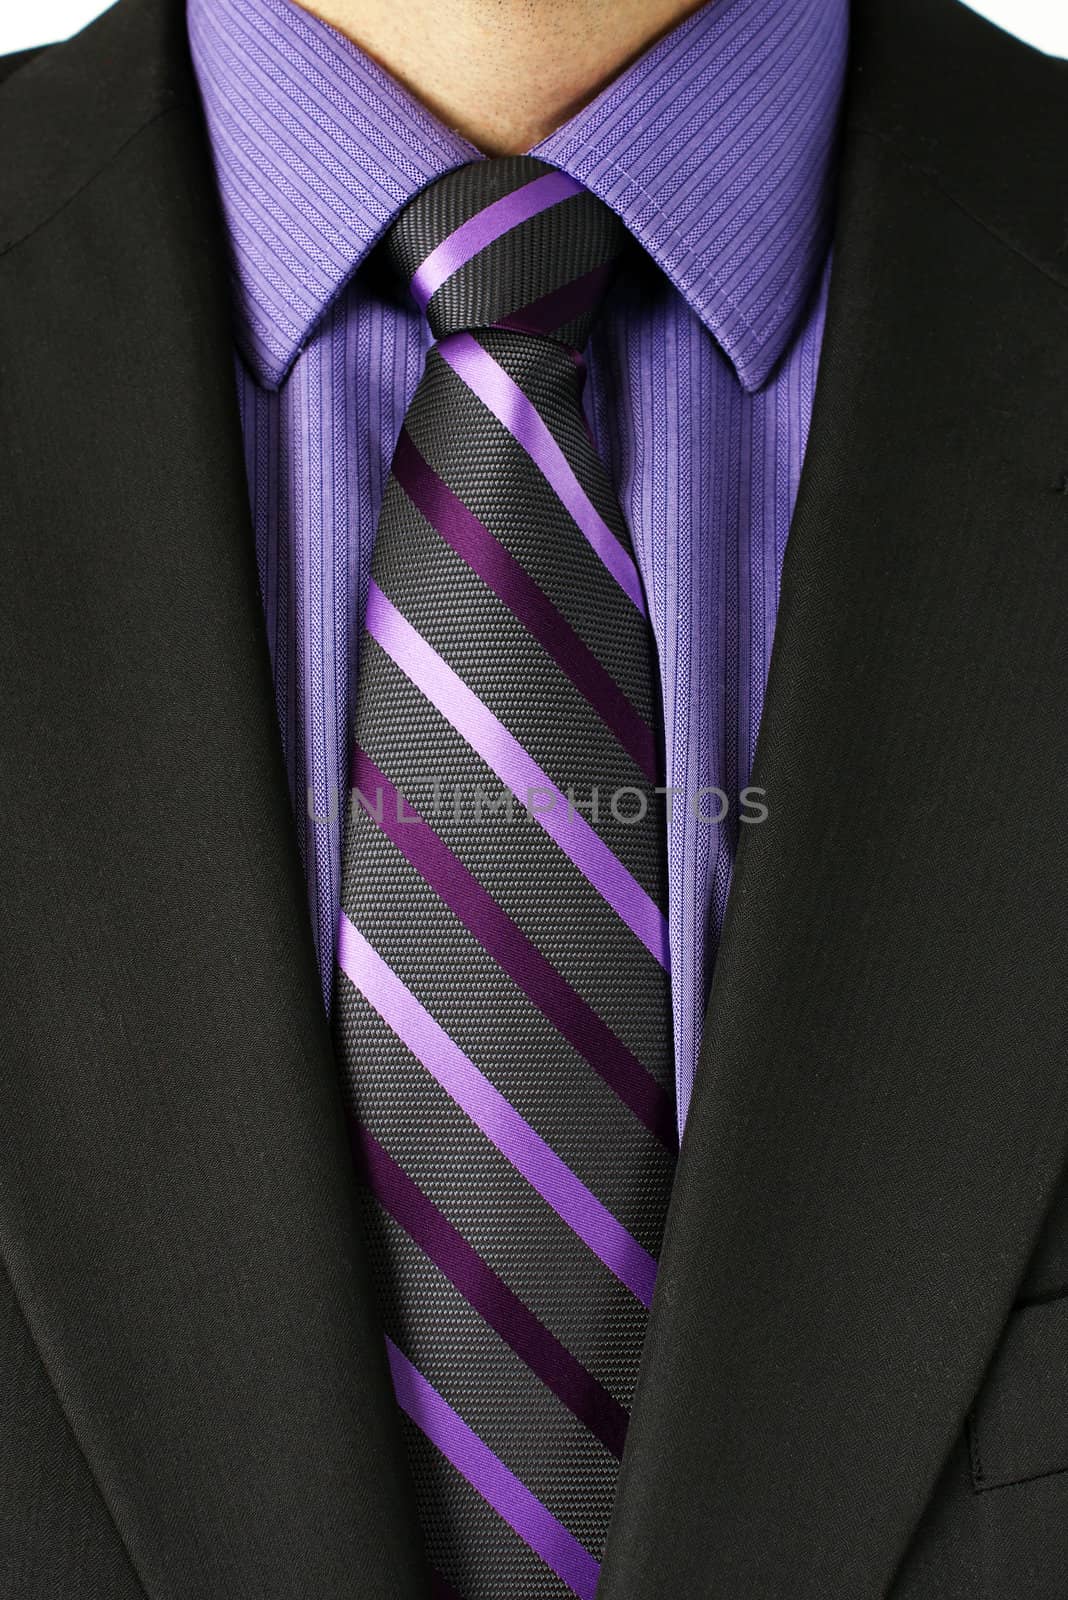 Man with purple striped tie by Mirage3